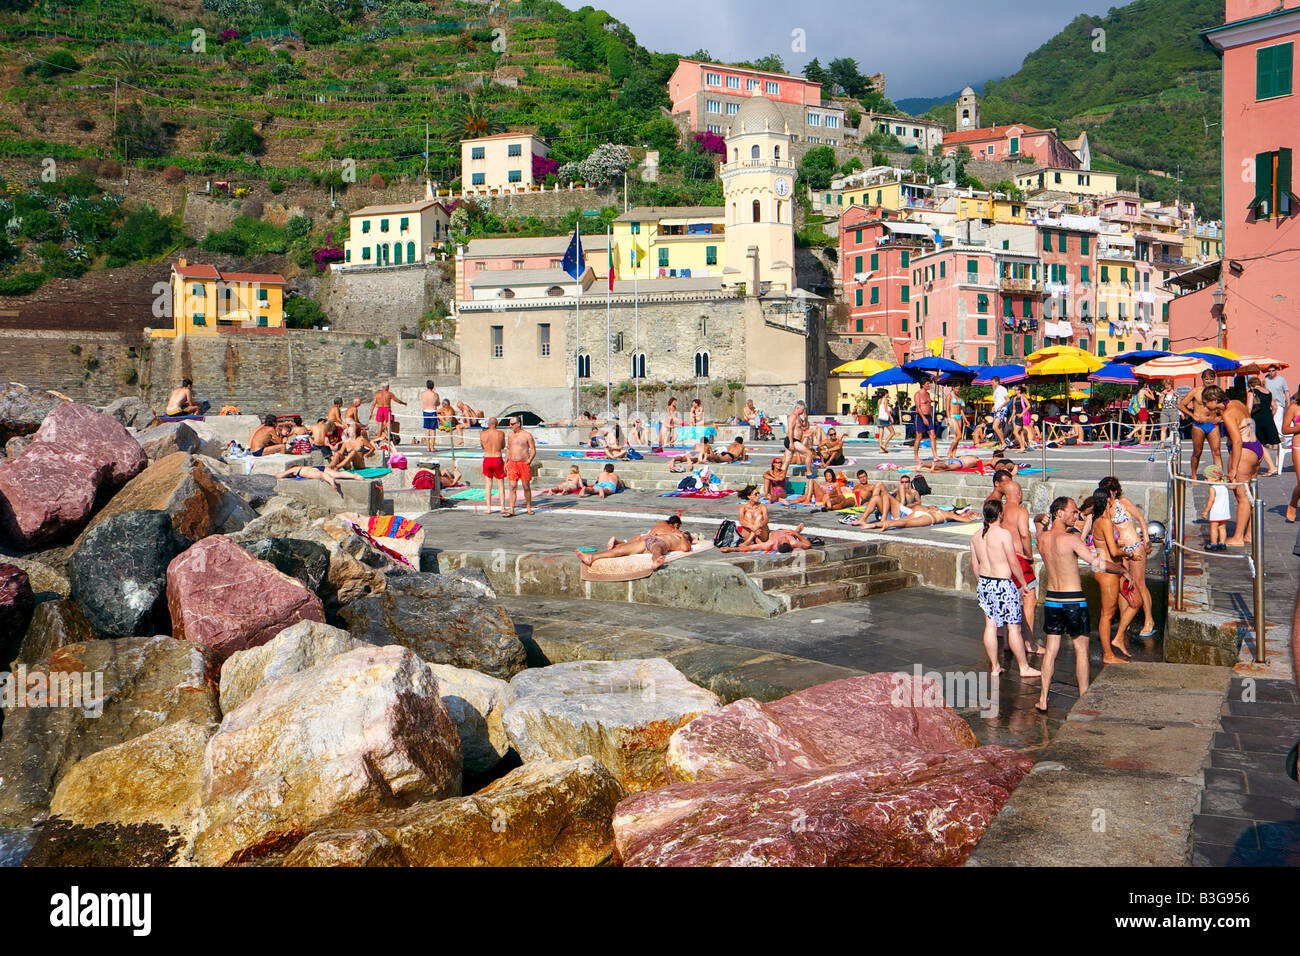 People sunbathing and enjoying the summer in Vernazza, Liturgia, Italy Stock Photo